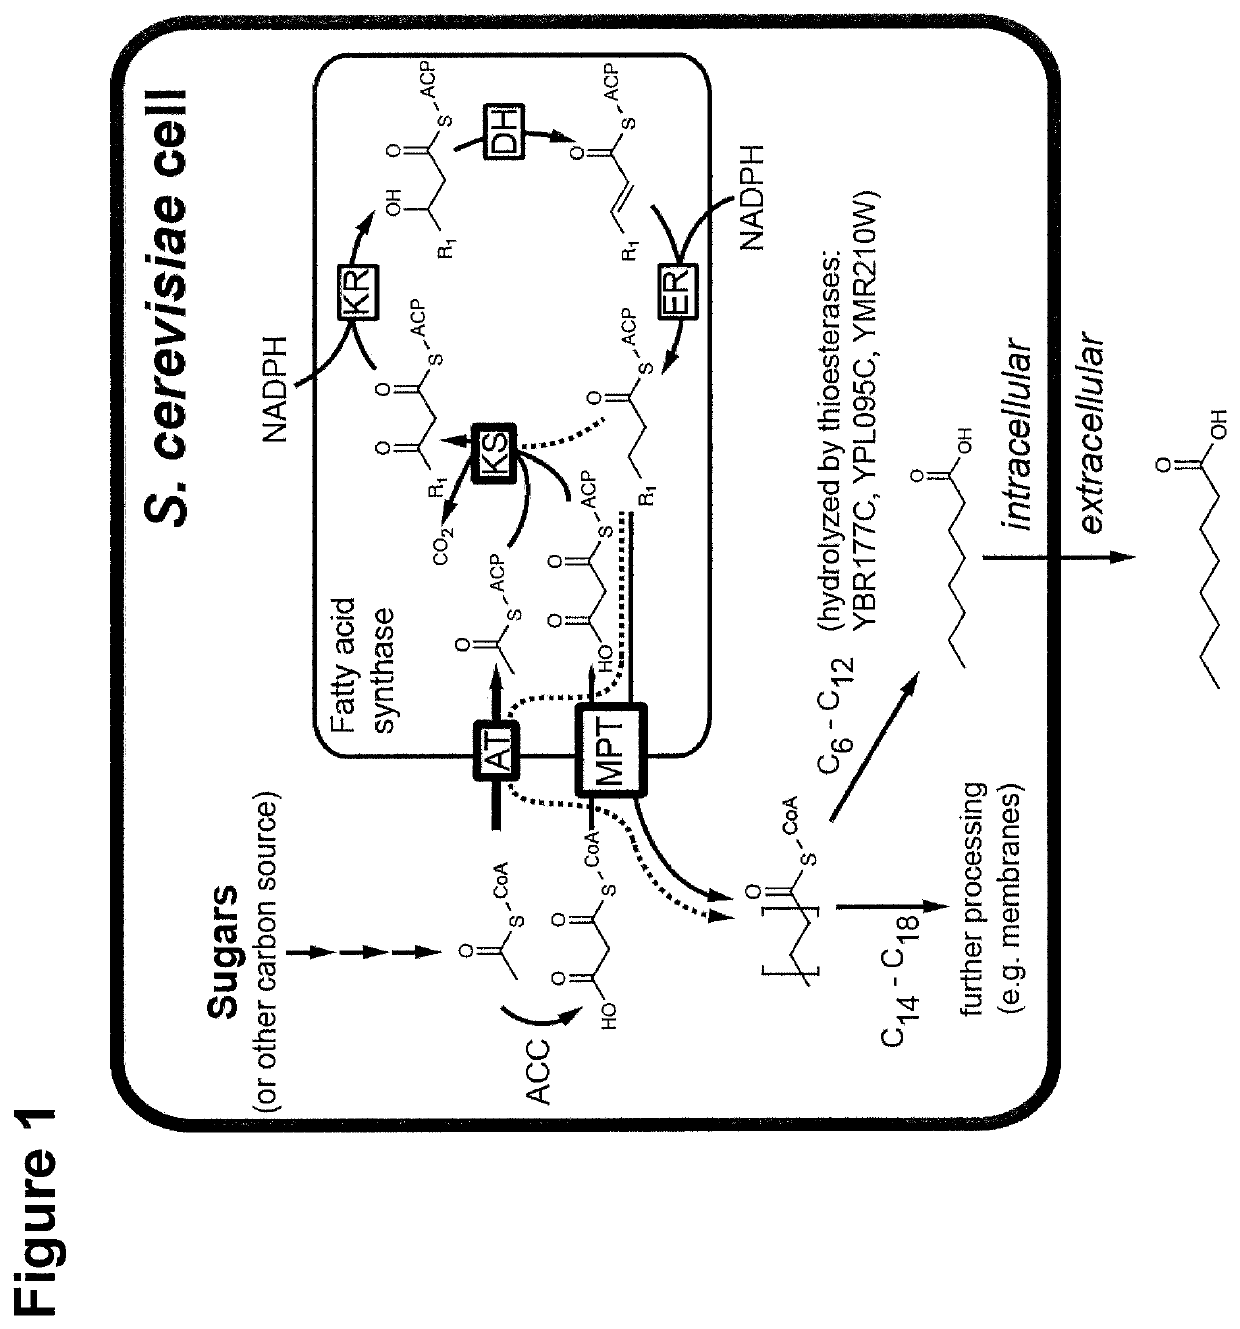 Microbiological production of short fatty acids and uses thereof